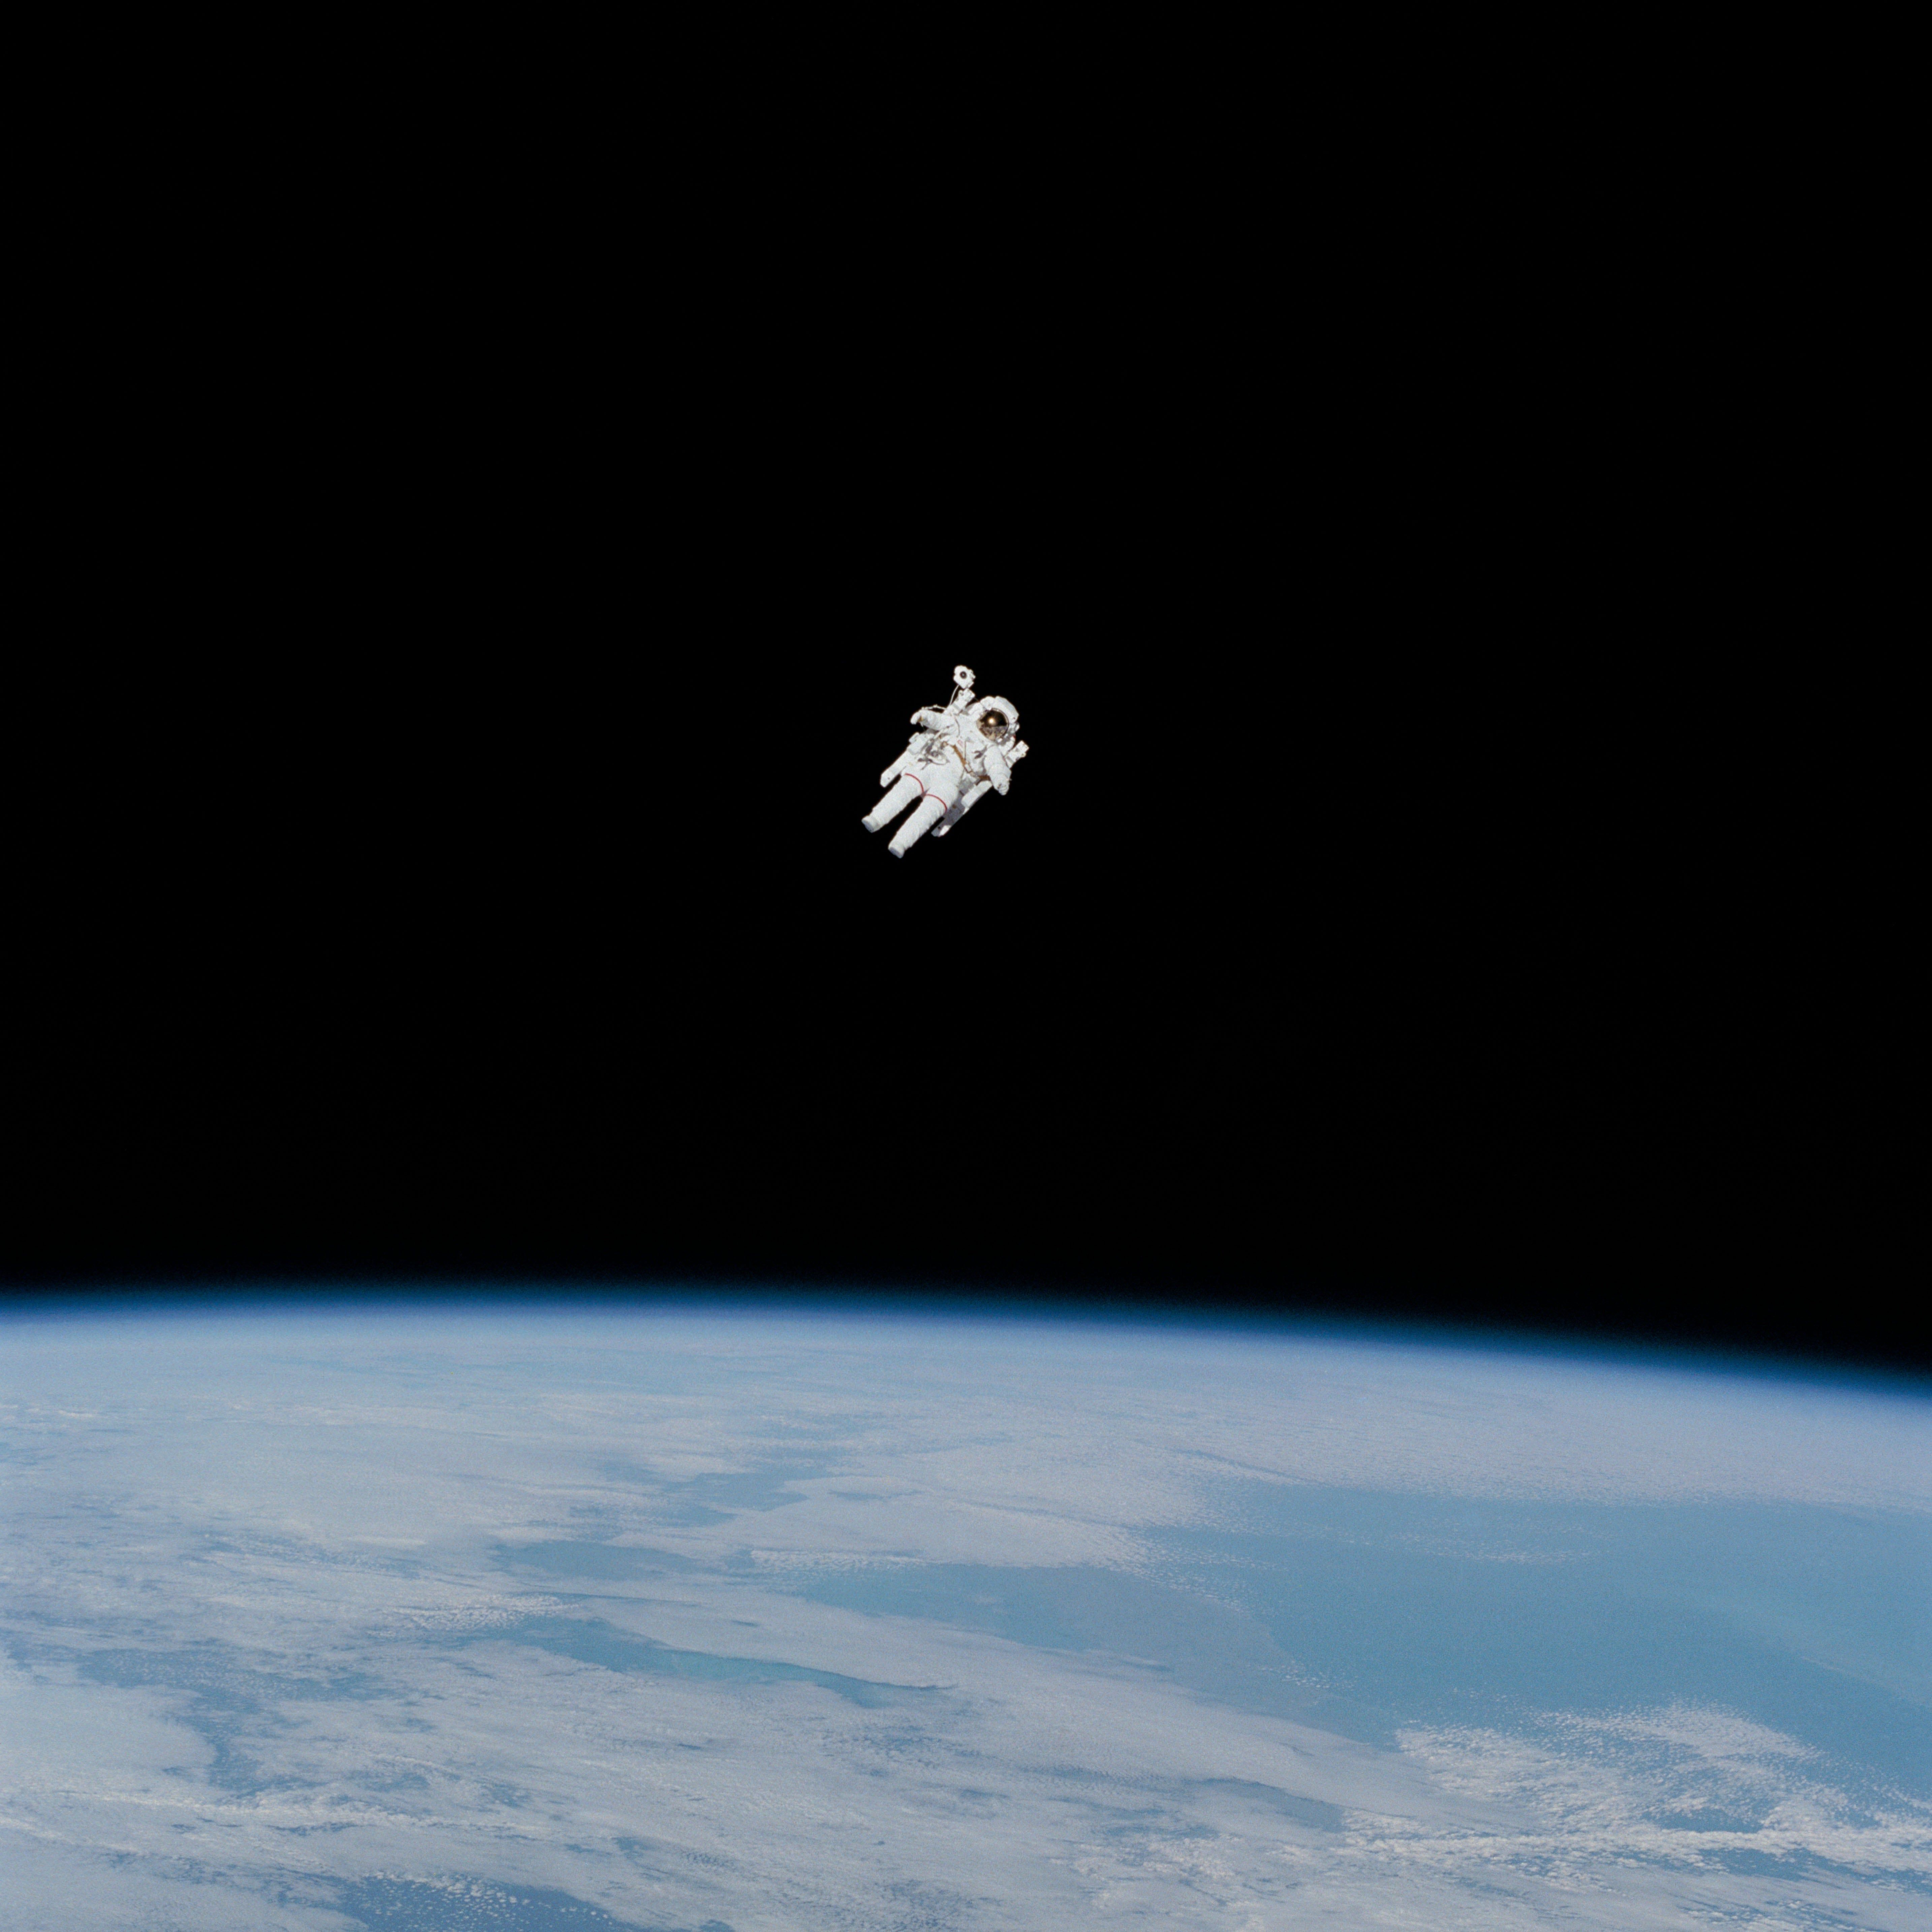 An astronaut floating in space above the Earth. - Space